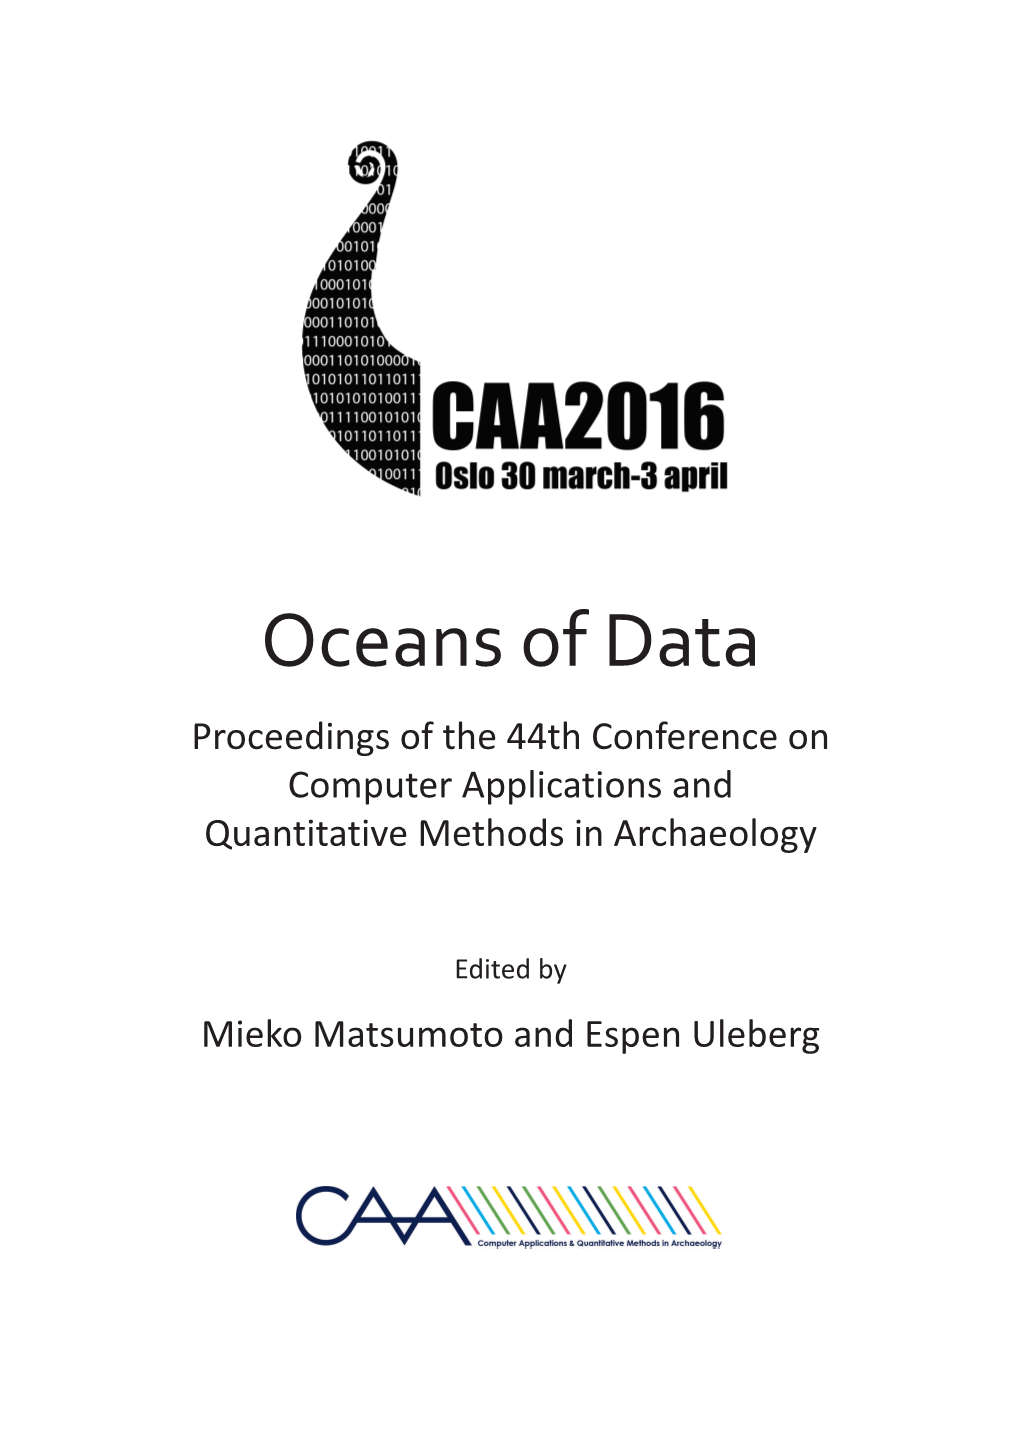 Oceans of Data Proceedings of the 44Th Conference on Computer Applications and Quantitative Methods in Archaeology